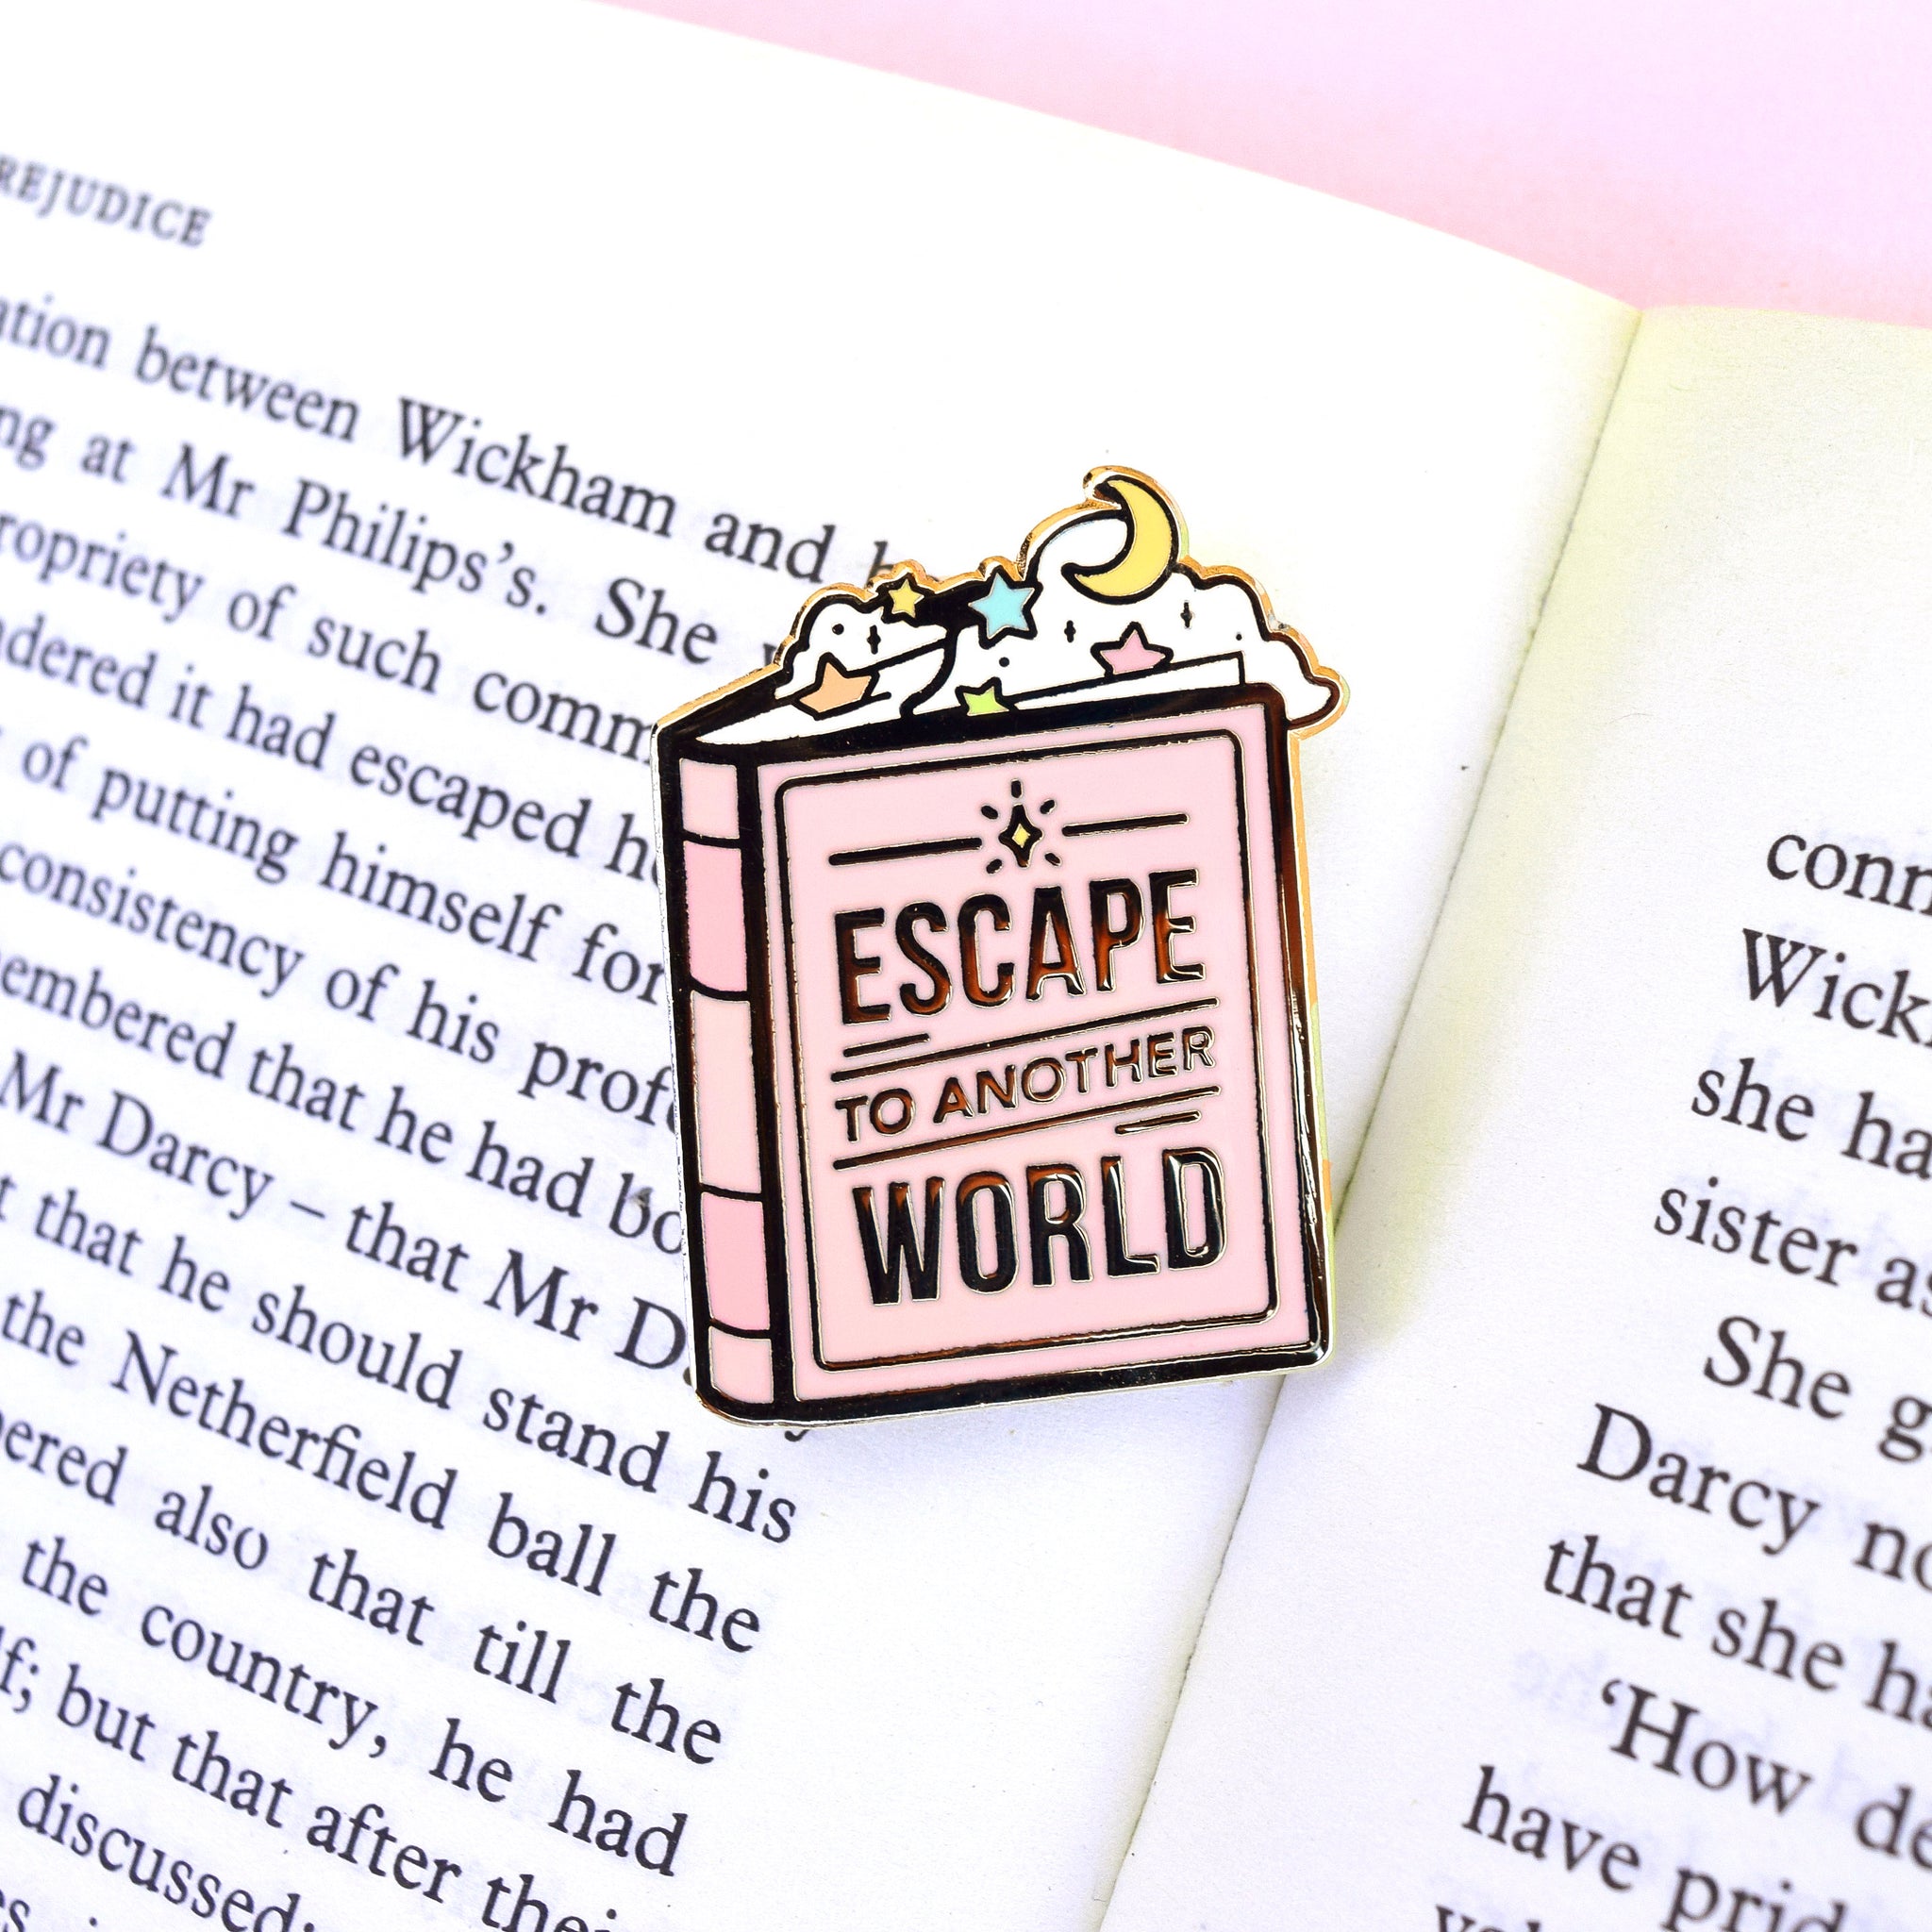 Escape to Another World Book Enamel Pin